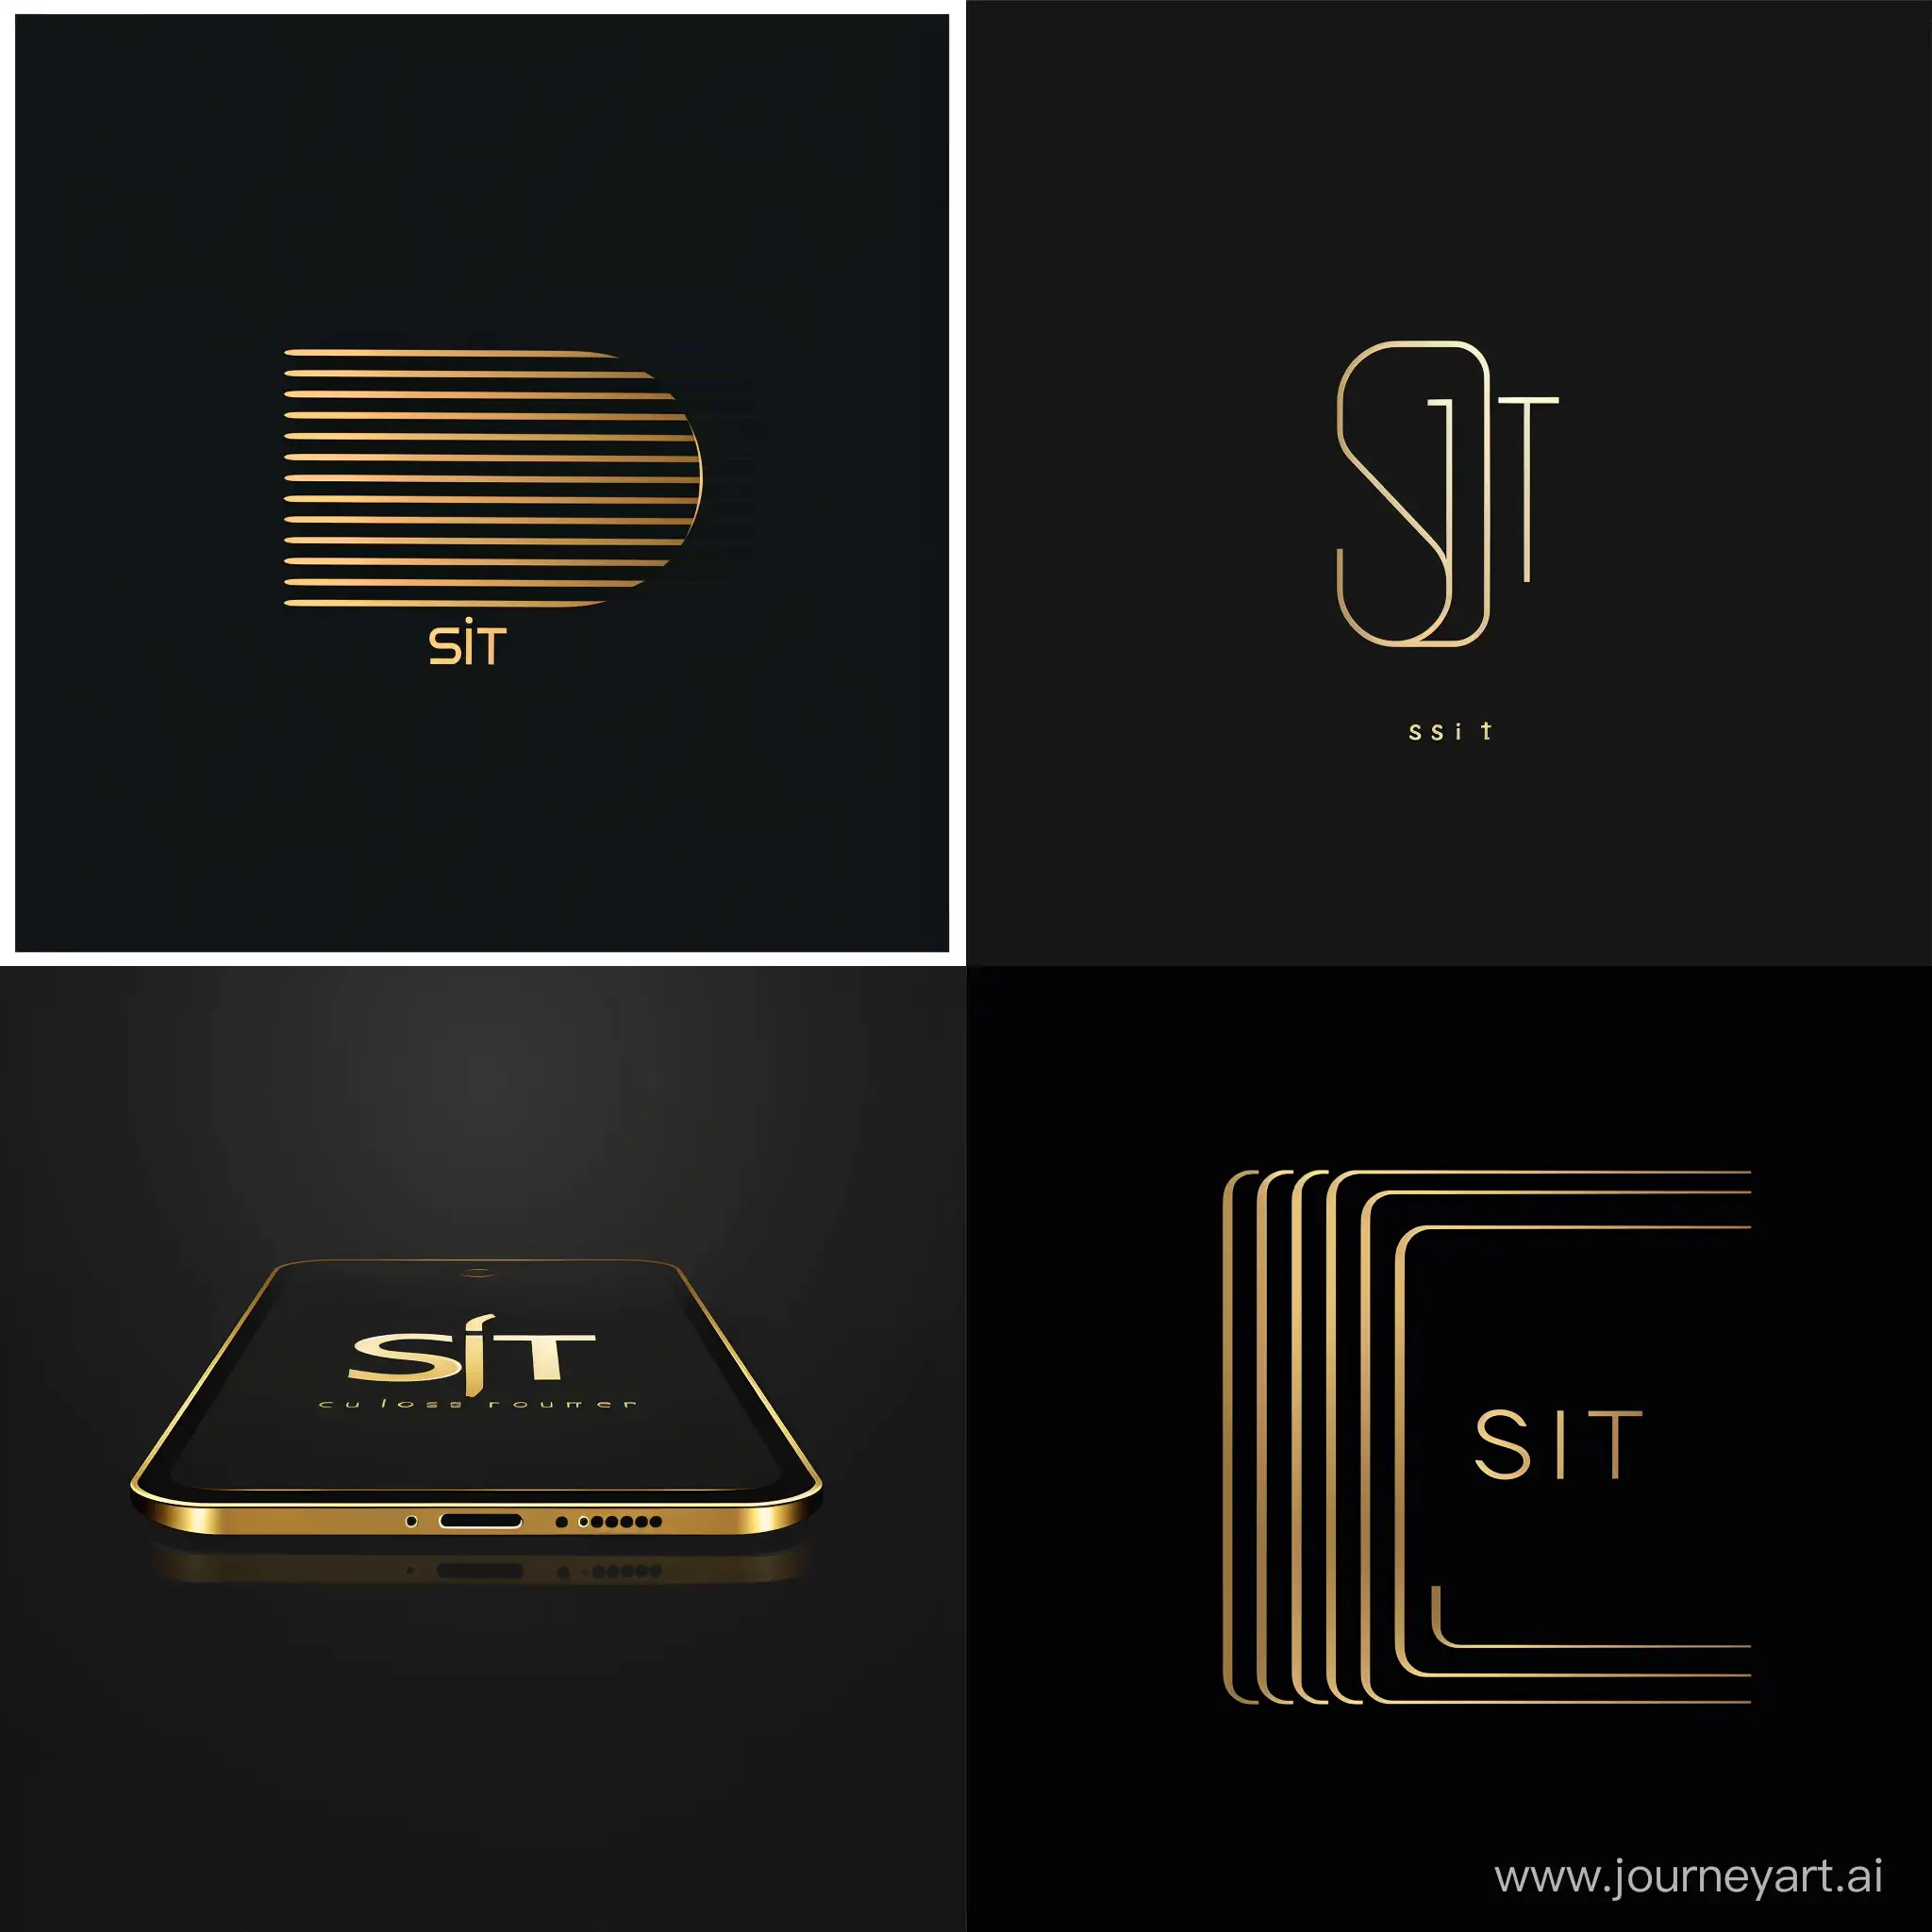 generate logo of company. The design features clear lines and flat areas of gold and black color, creating a sophisticated and modern look. The logo focuses on the unique elements of phone while representing the communication aspect. The text "SiT" is incorporated into the logo, adding a personalized touch. The design is not overly bright, allowing it to attract attention without appearing minimalist.